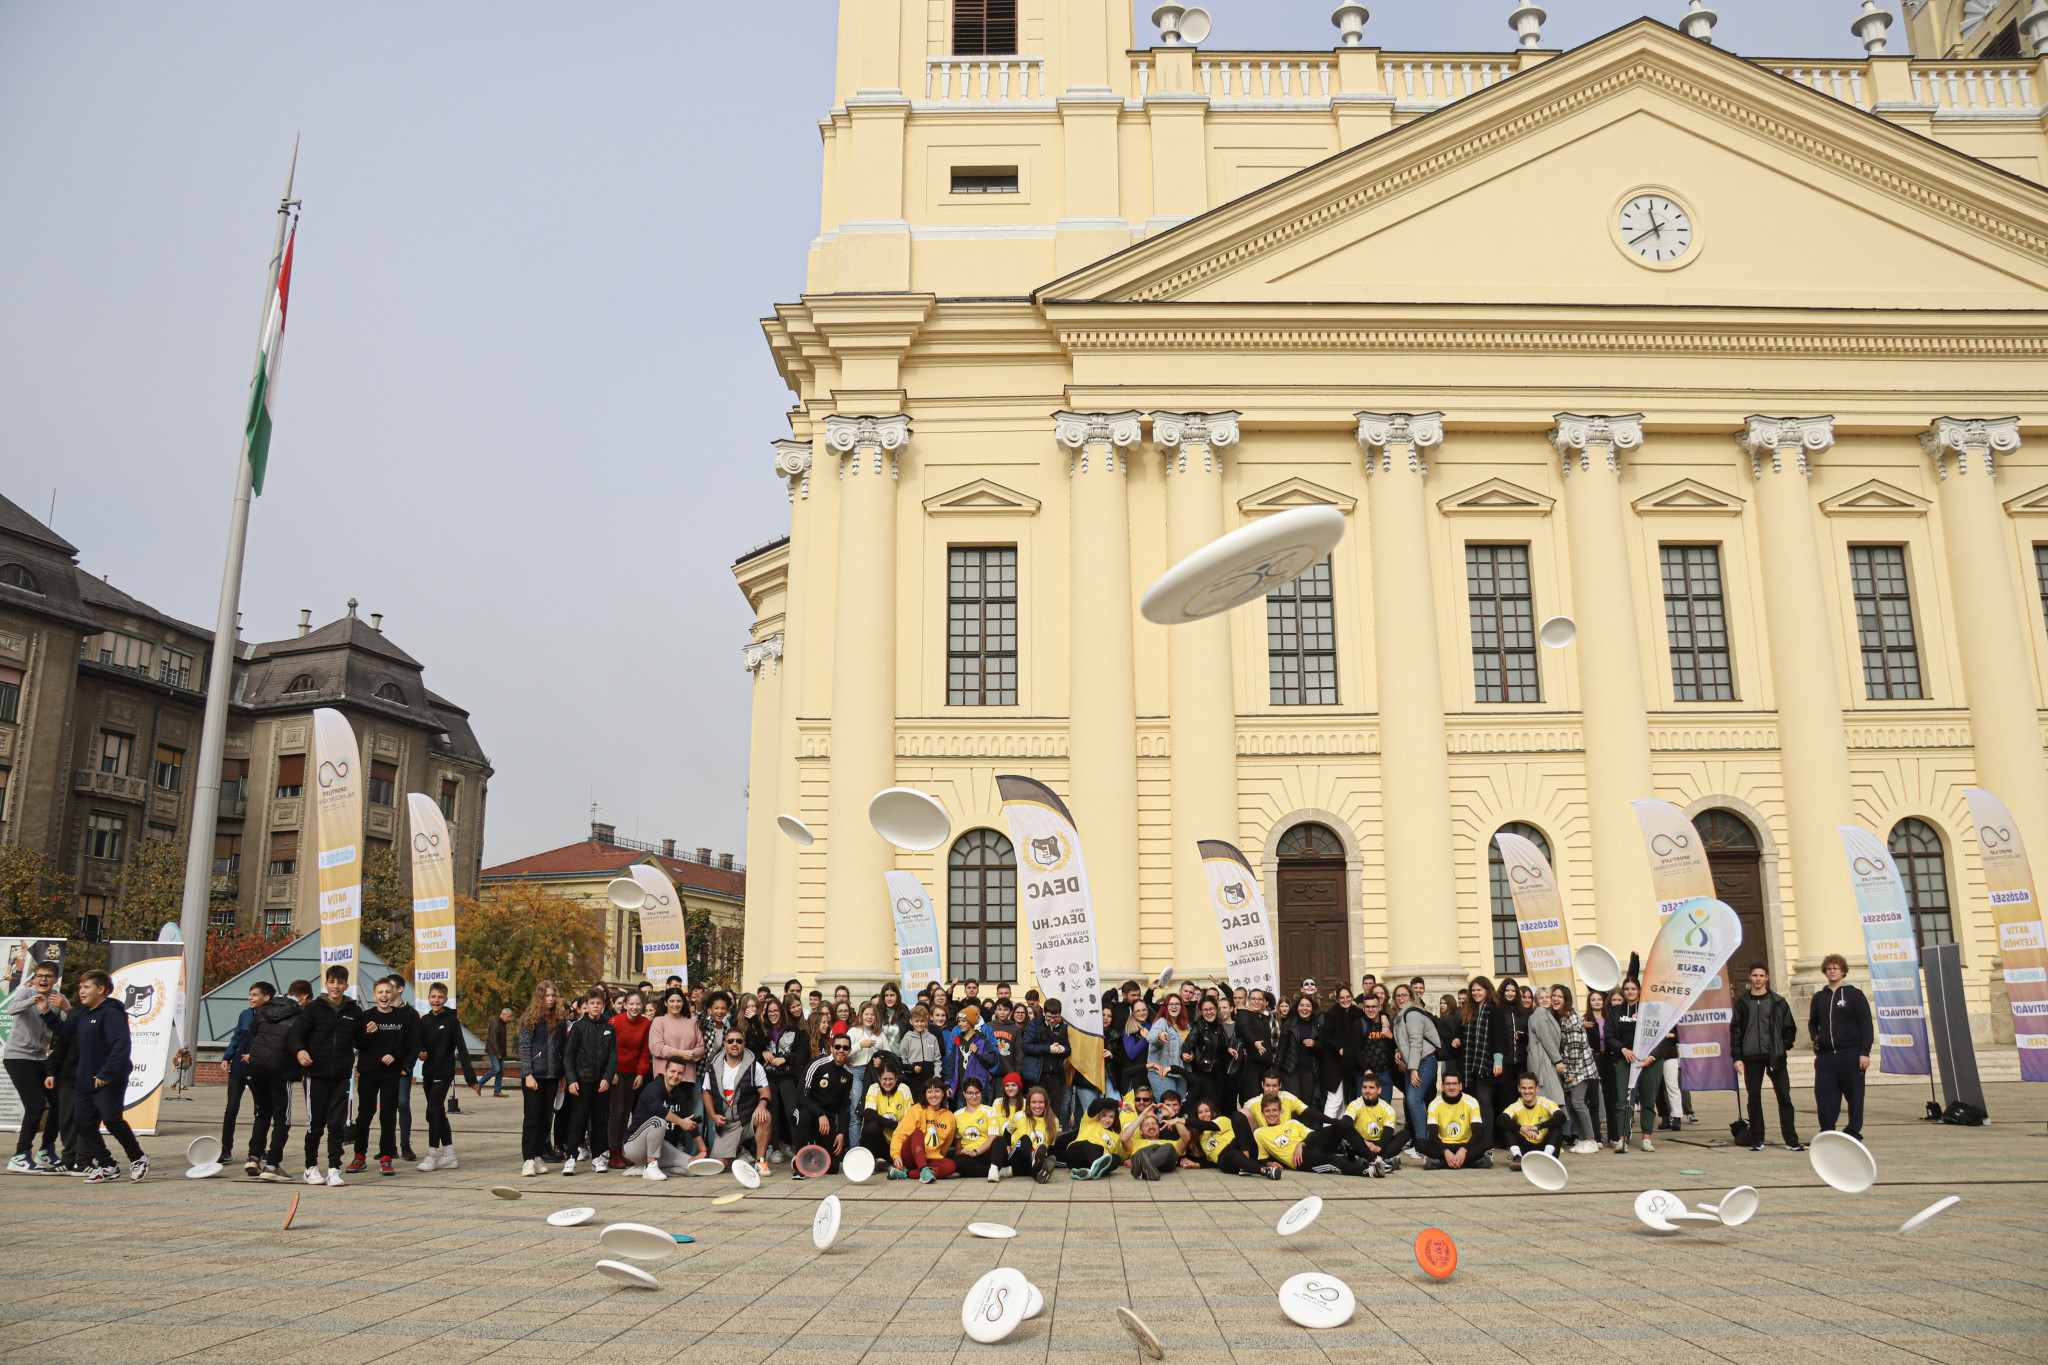 The Sport-Life Balance Program is engaged in a pilot project with the World Flying Disc Federation ©Attila Mizser